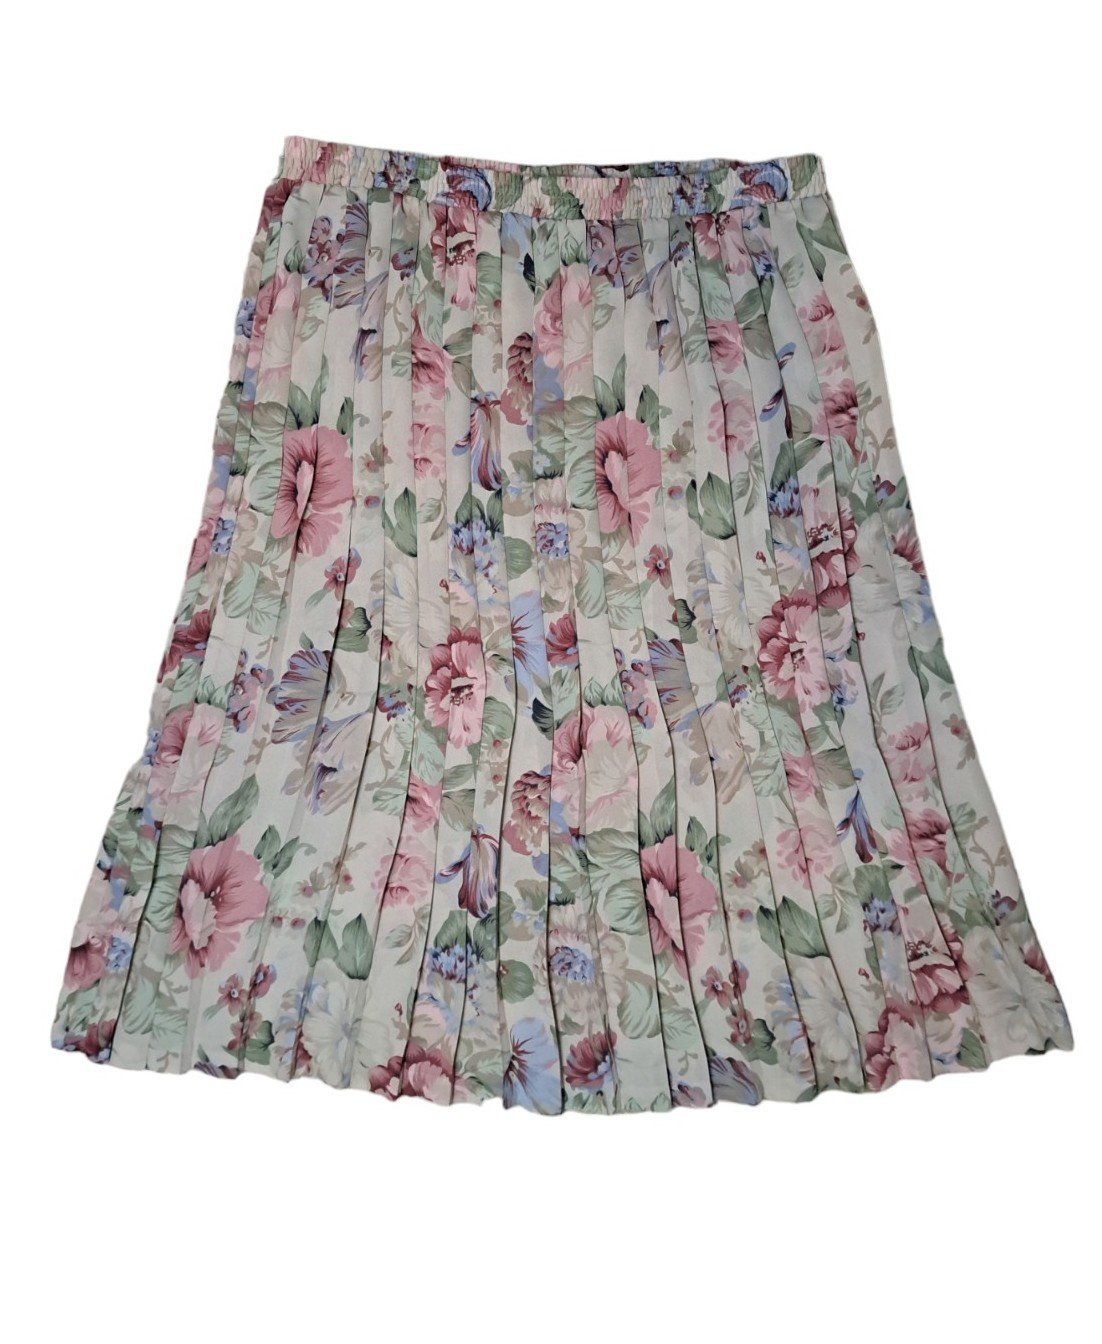 Special offer  Floral skirt size 22W kqO0dCigX Great